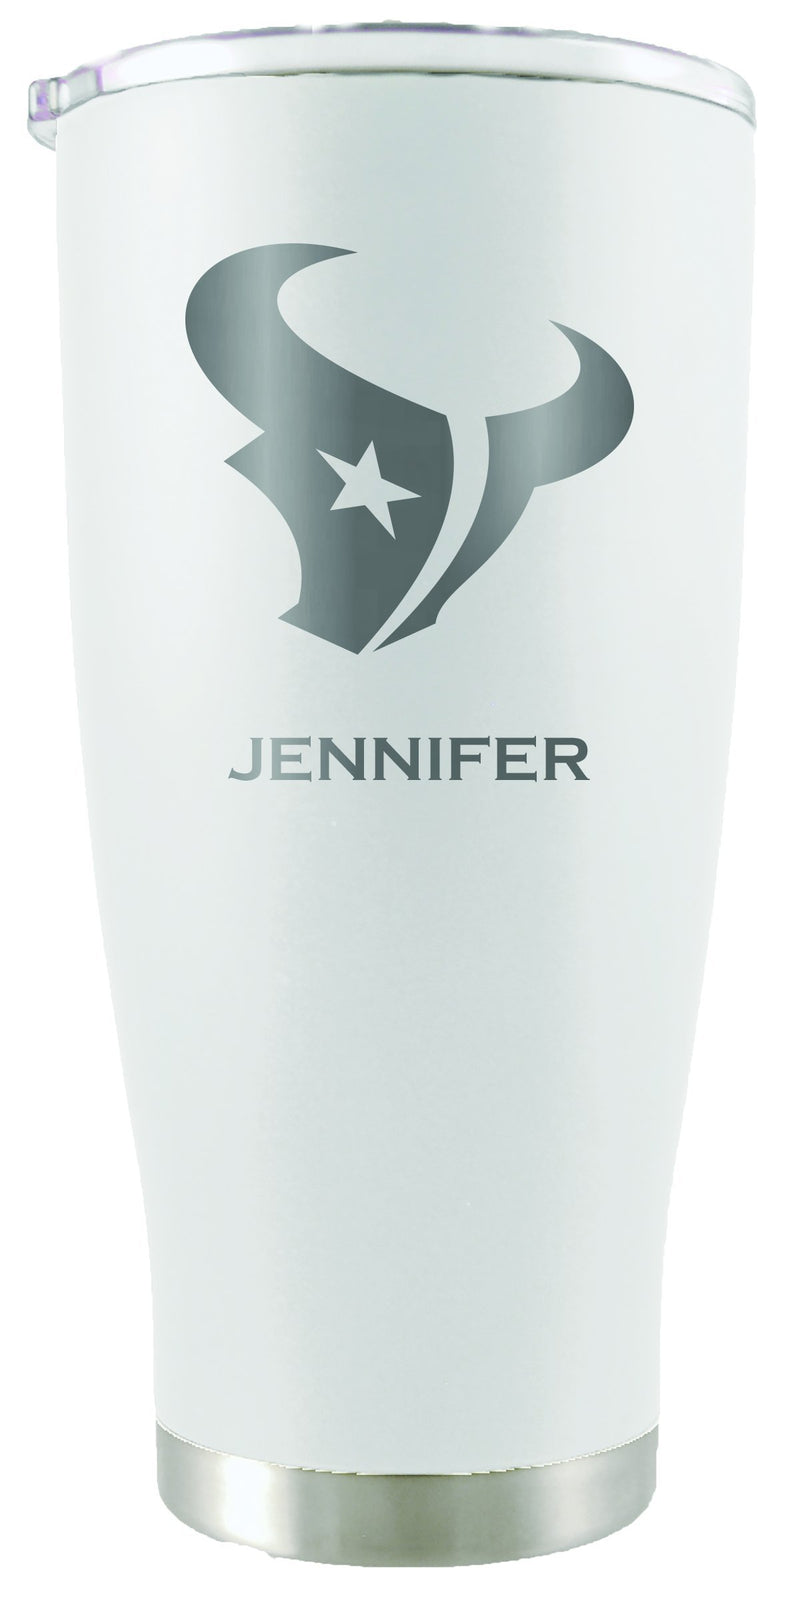 20oz White Personalized Stainless Steel Tumbler | Houston Texans
CurrentProduct, Drinkware_category_All, Houston Texans, HTE, NFL, Personalized_Personalized, Stainless Steel
The Memory Company